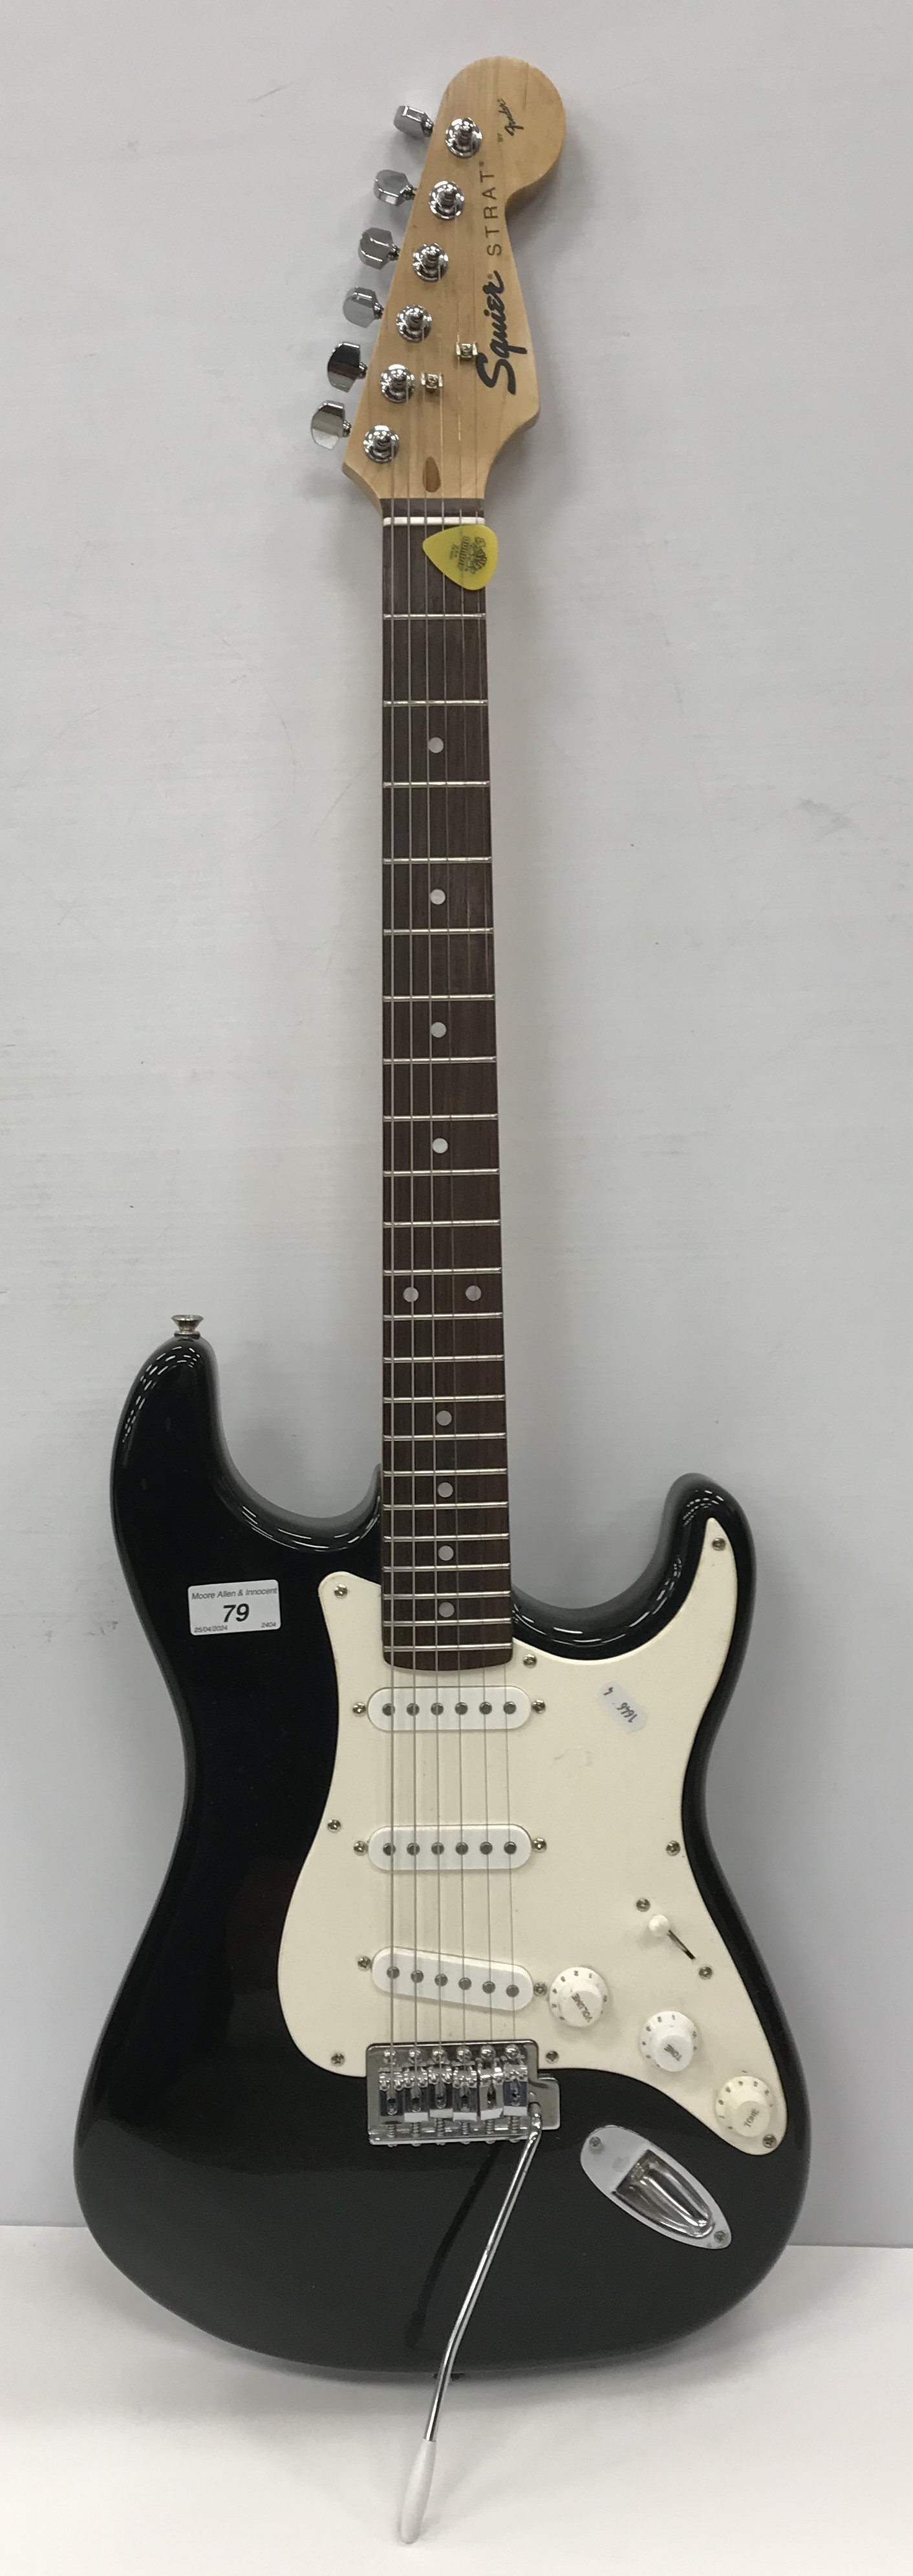 A Fender Squire Strat electric guitar, black with white finger board No.